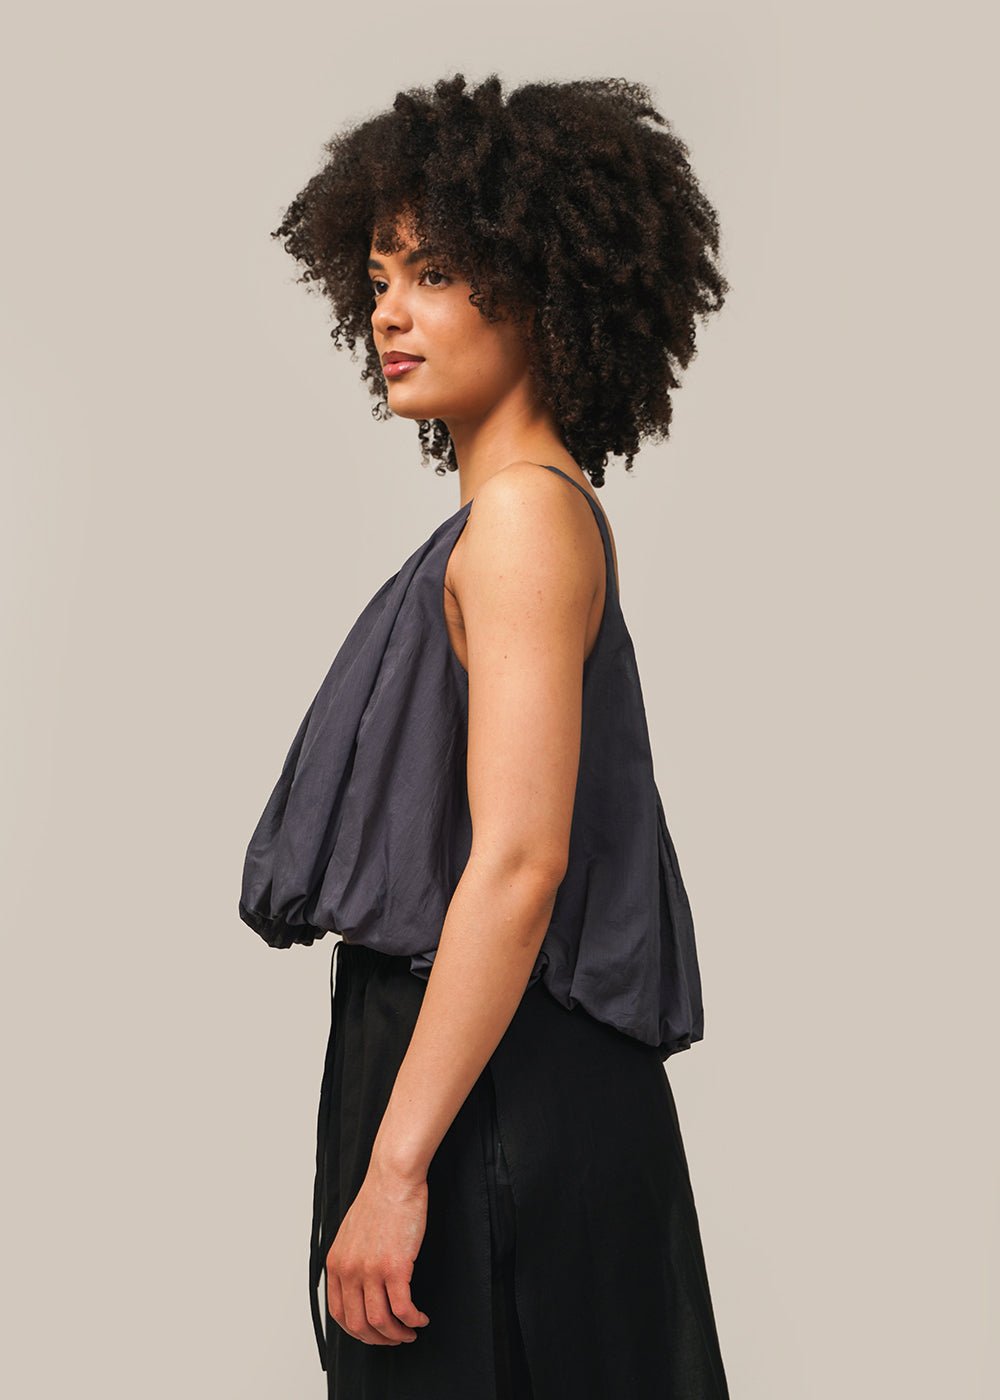 AMOMENTO Navy Sheer Volume Crop Top - New Classics Studios Sustainable Ethical Fashion Canada